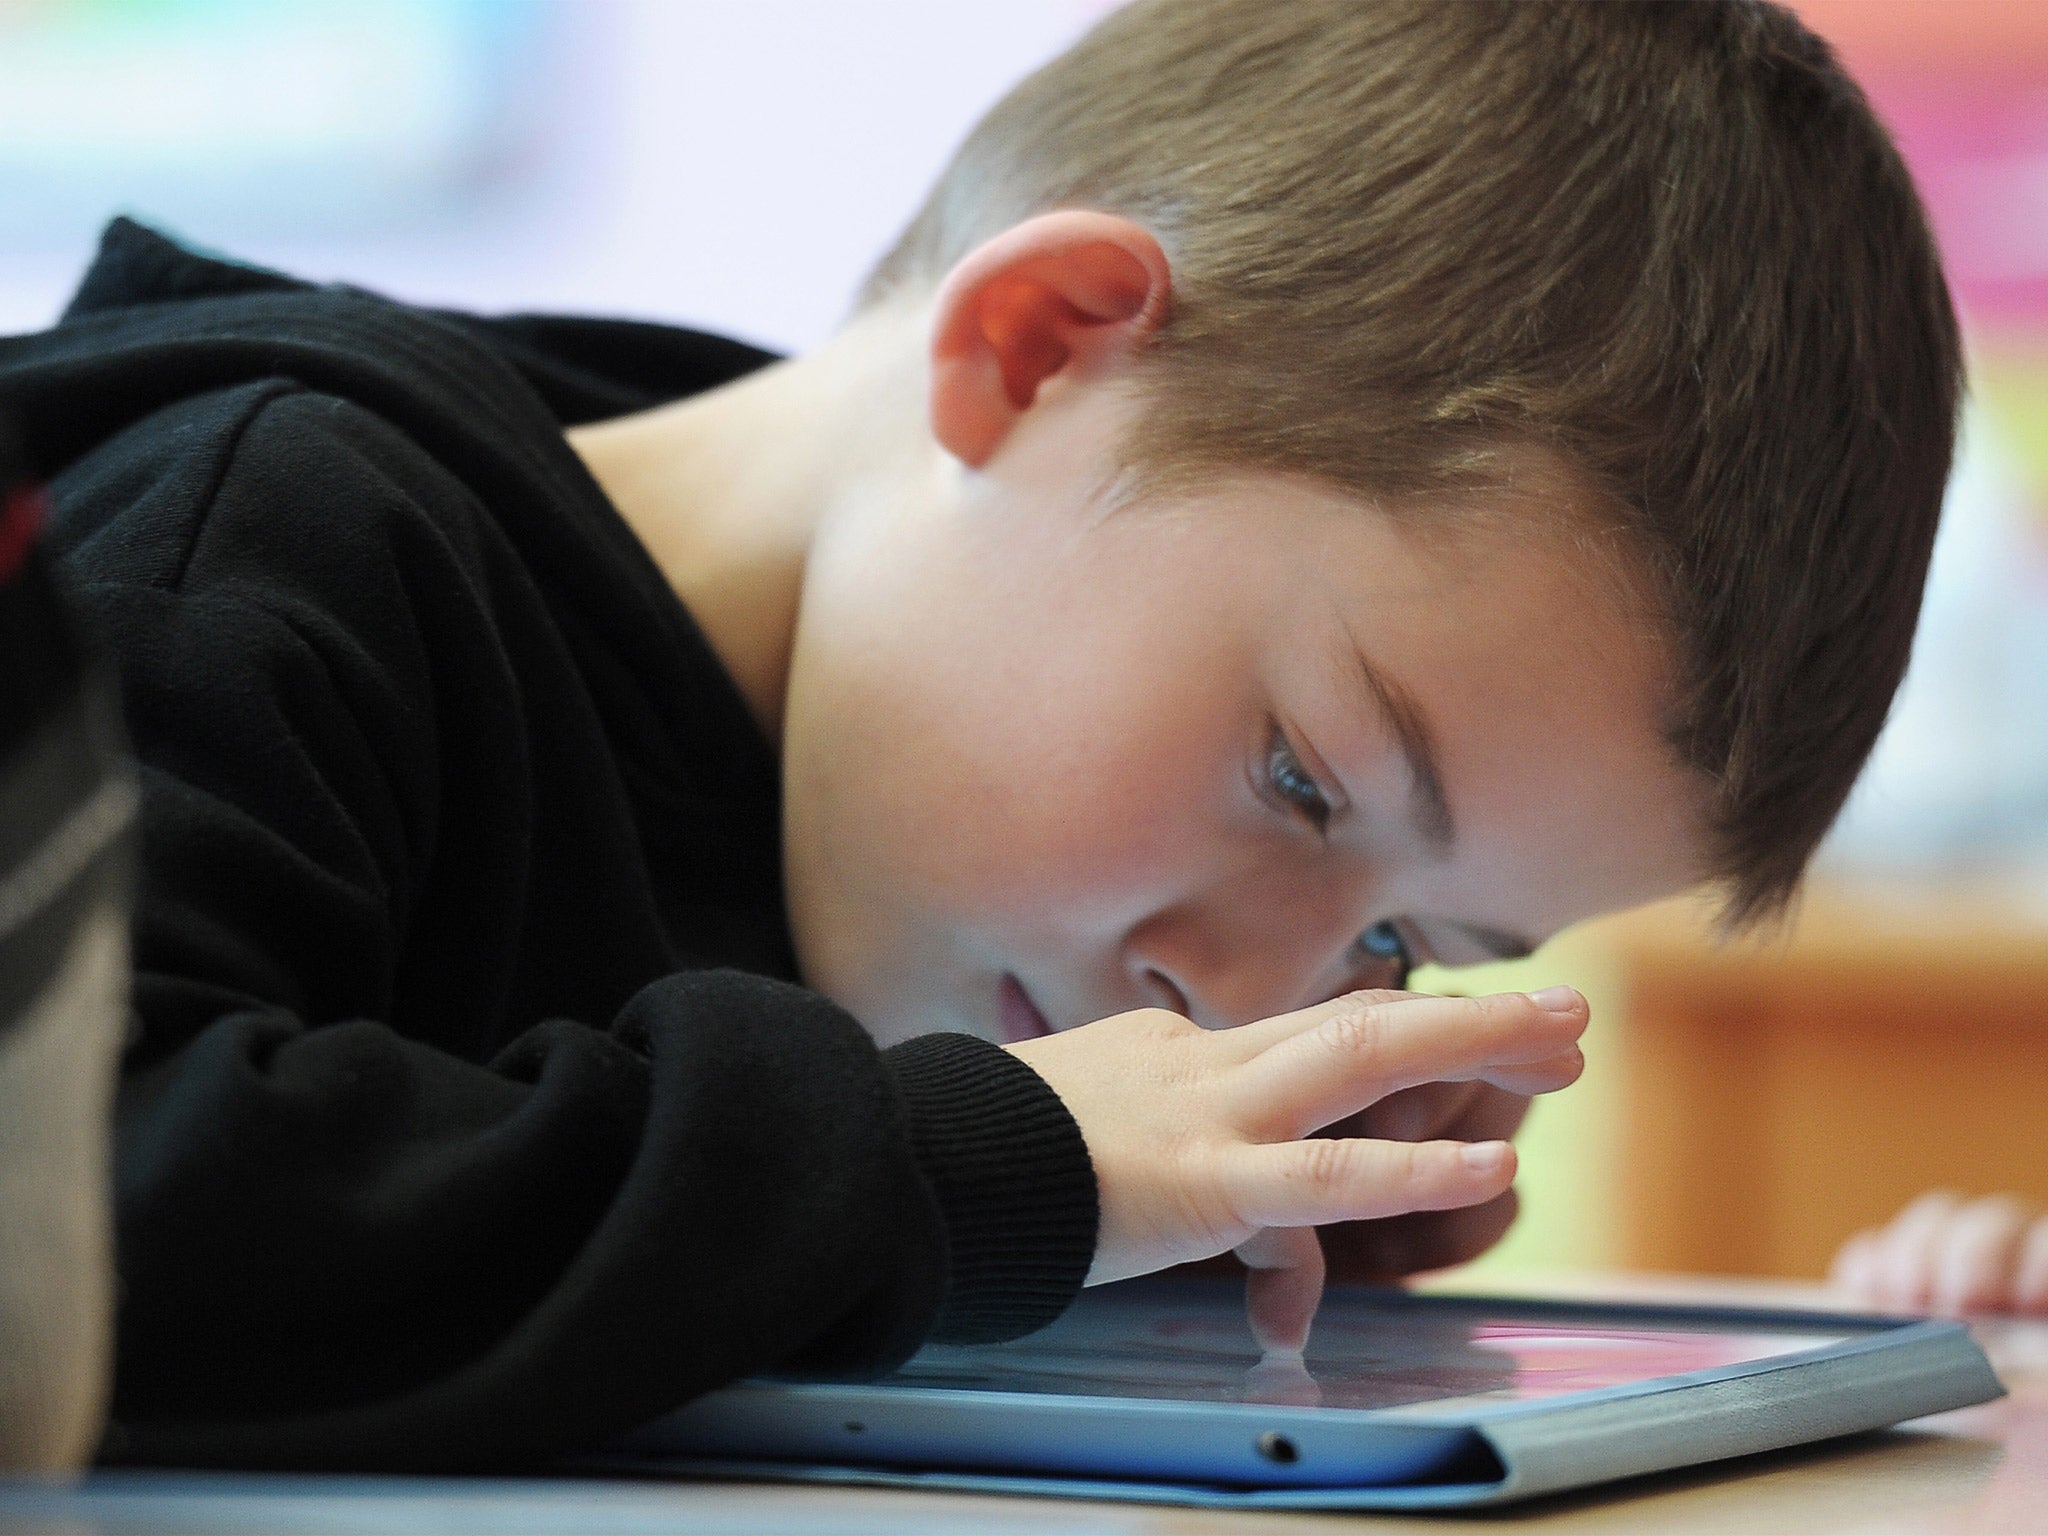 Parents are increasingly allowing children to use their tablets